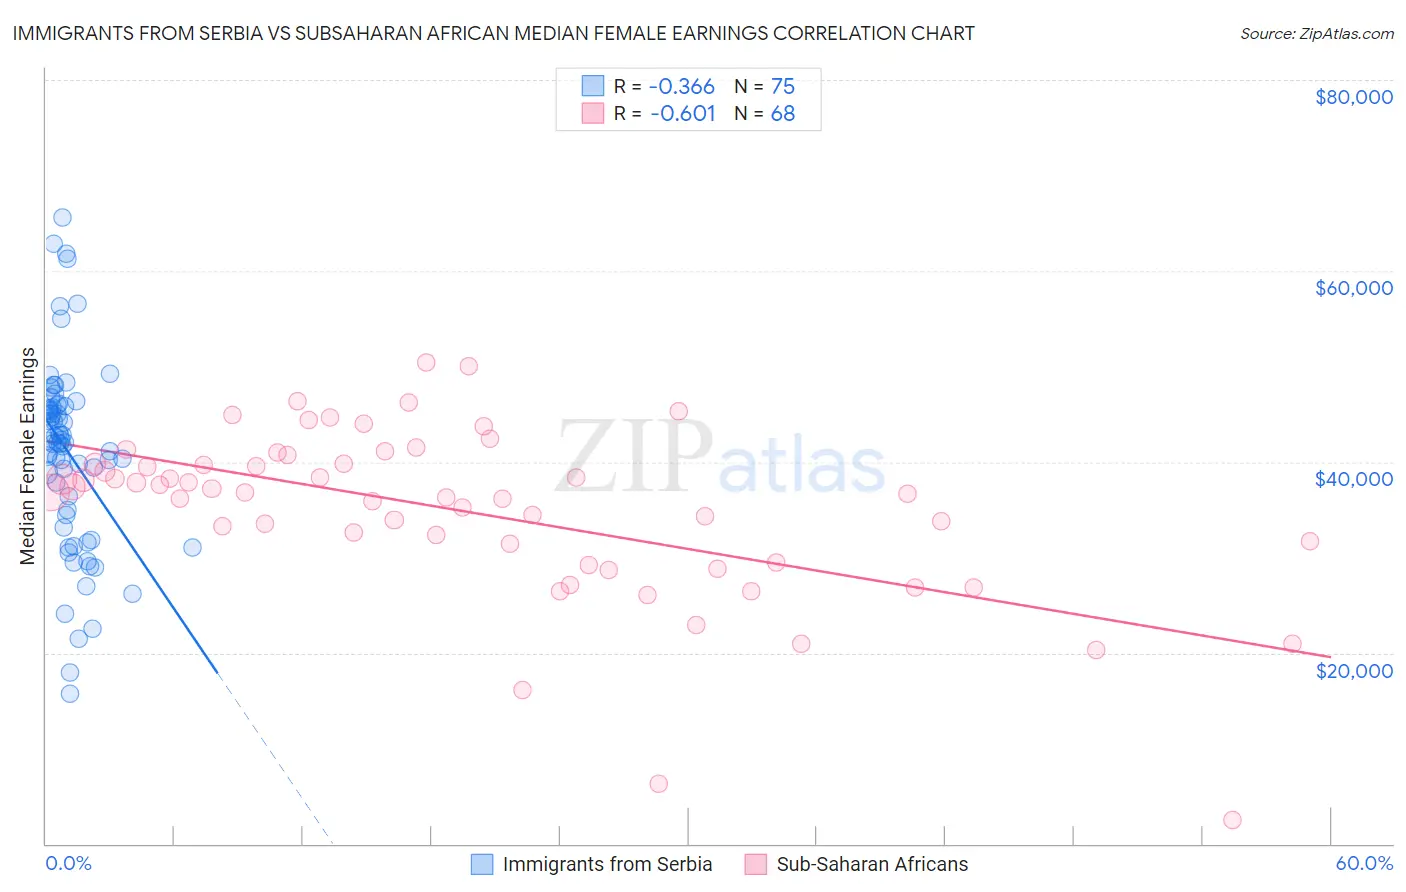 Immigrants from Serbia vs Subsaharan African Median Female Earnings